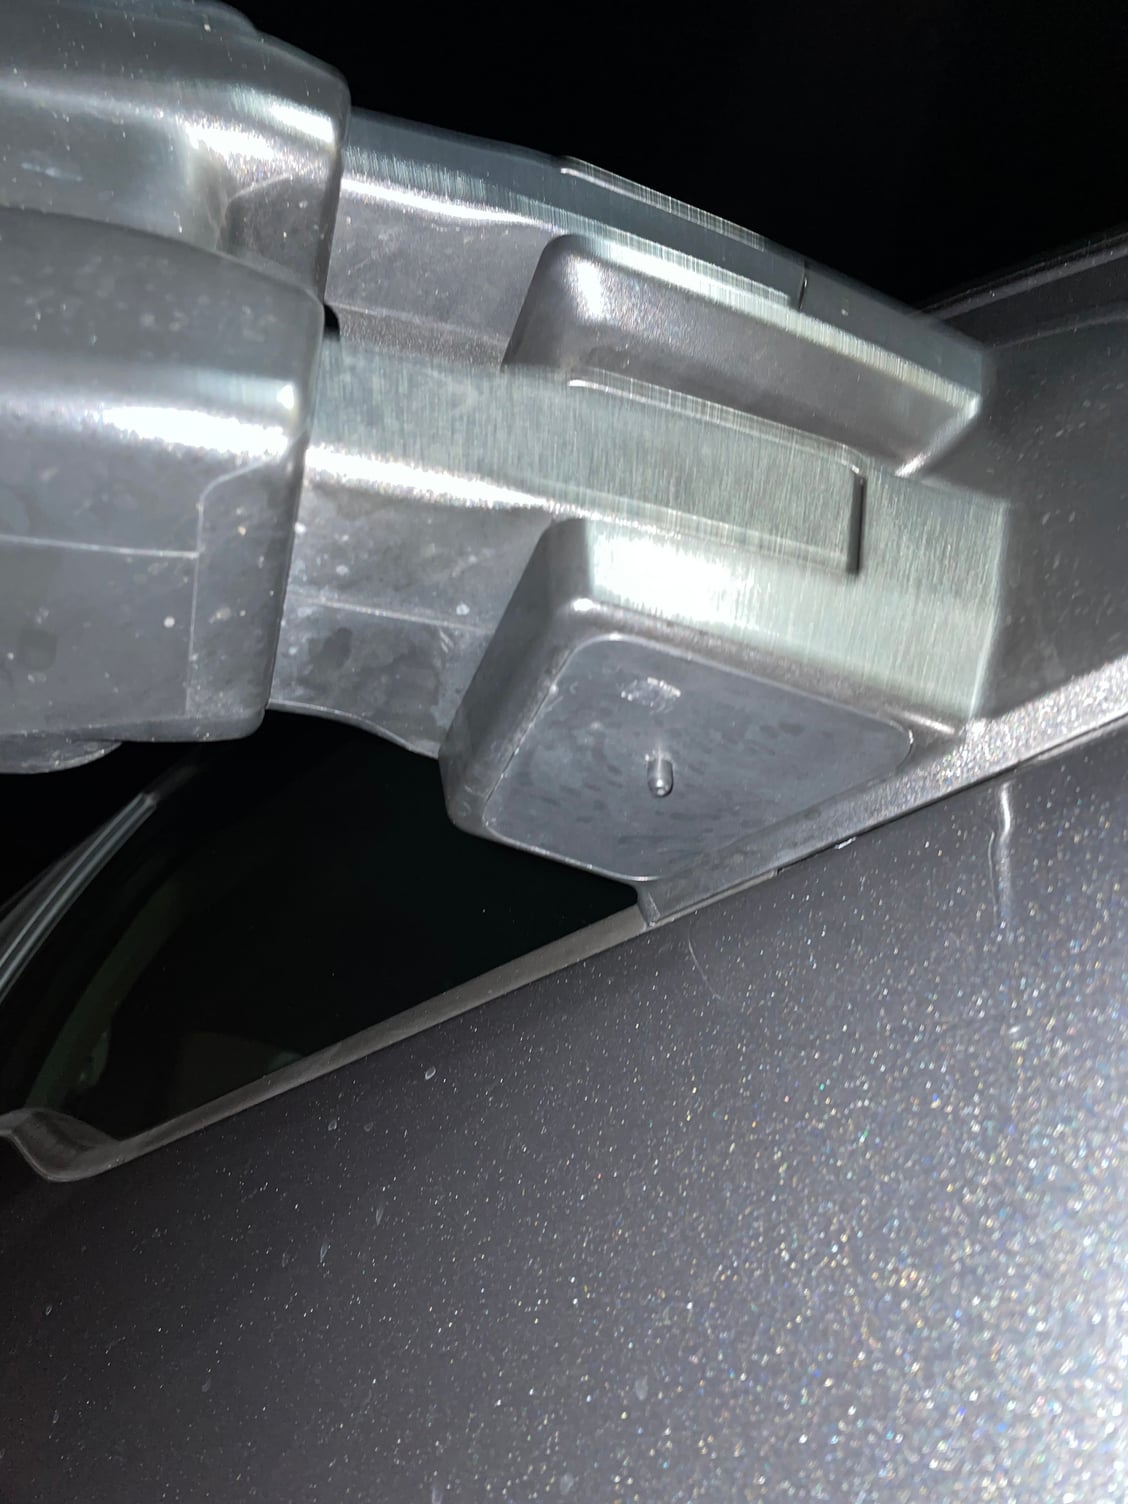 Air Temp Sensor Issue with F150 Power Fold Mirror Upgrade - Ford F150 ...